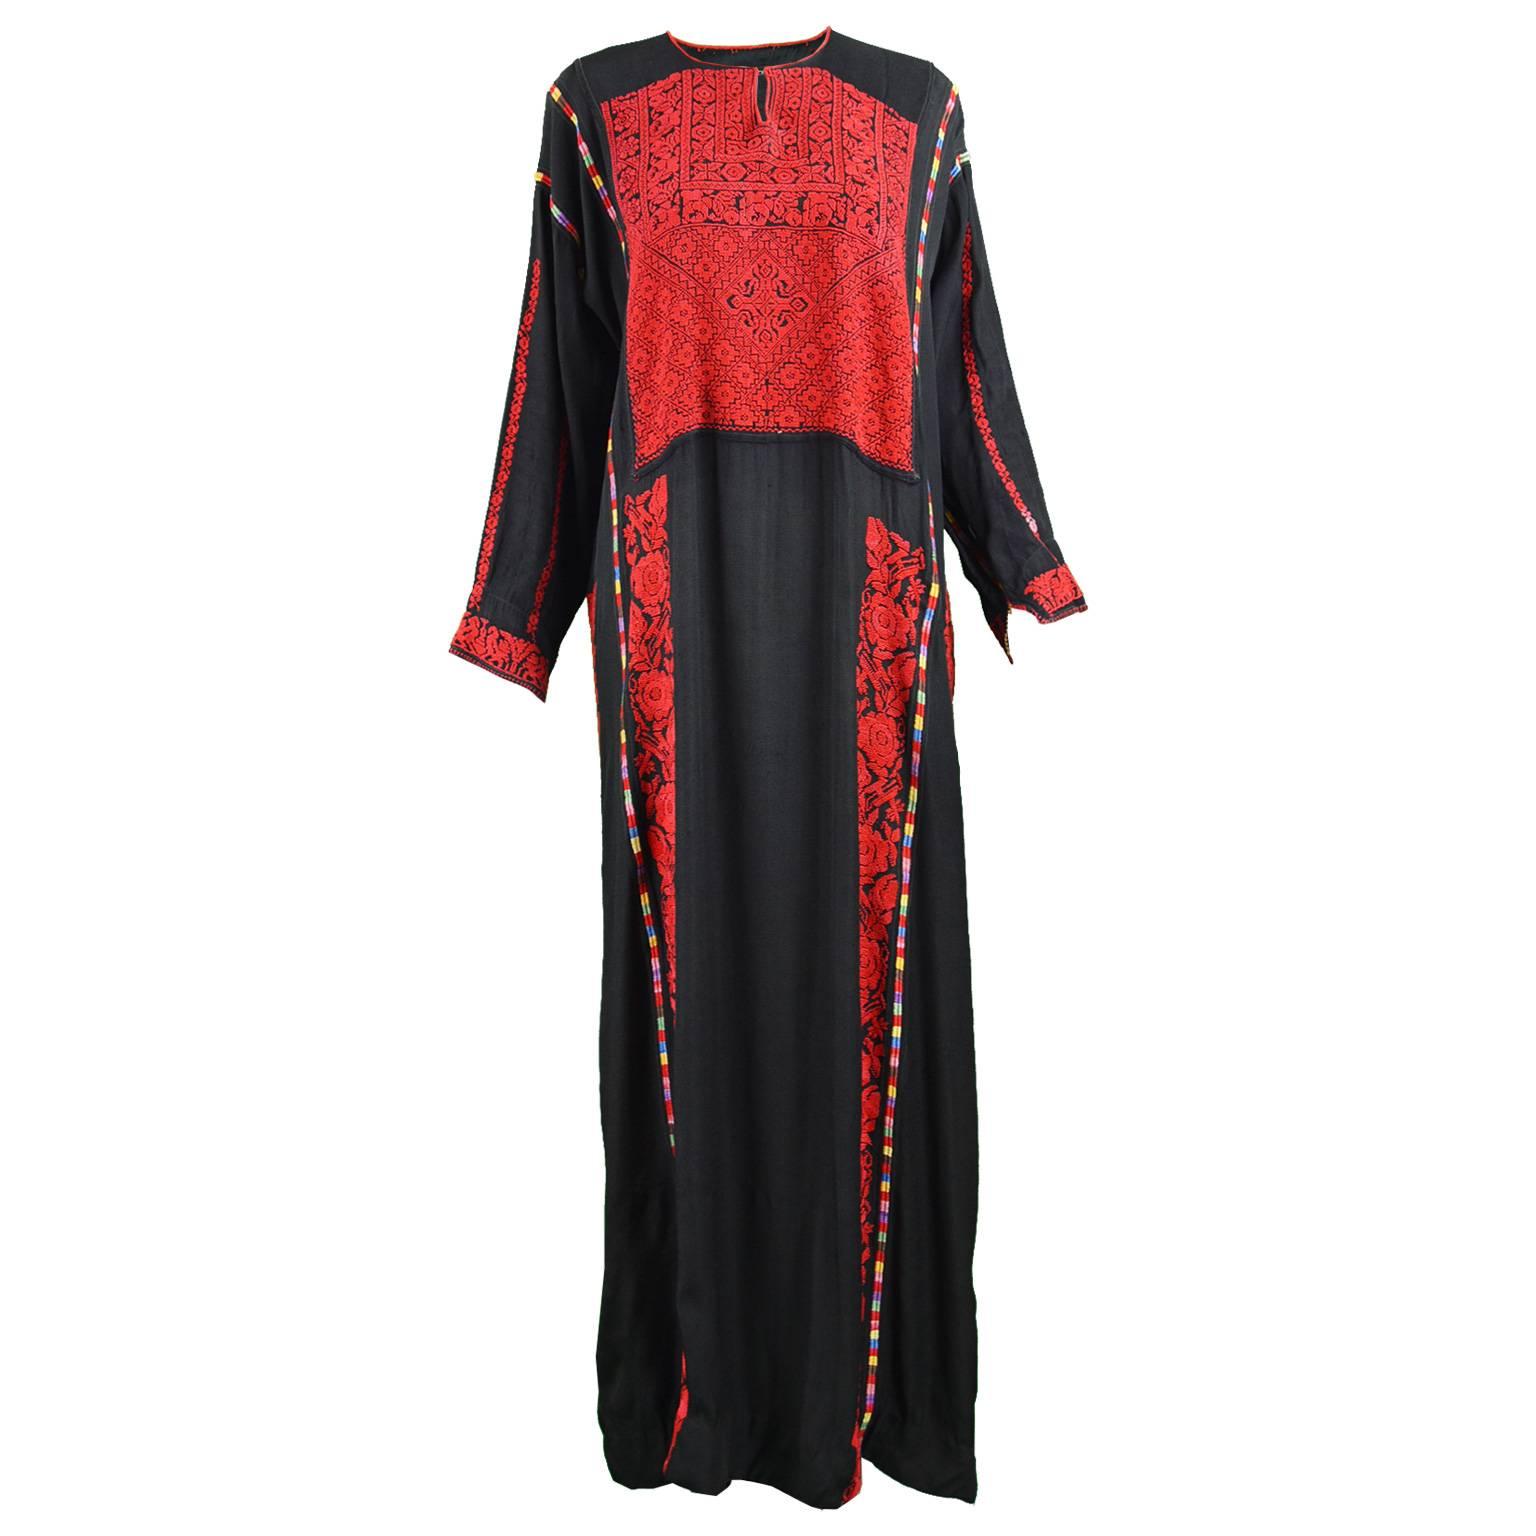 Hand Embroidered Black Vintage Bedouin Palestinian Tribal Dress, c.1930s